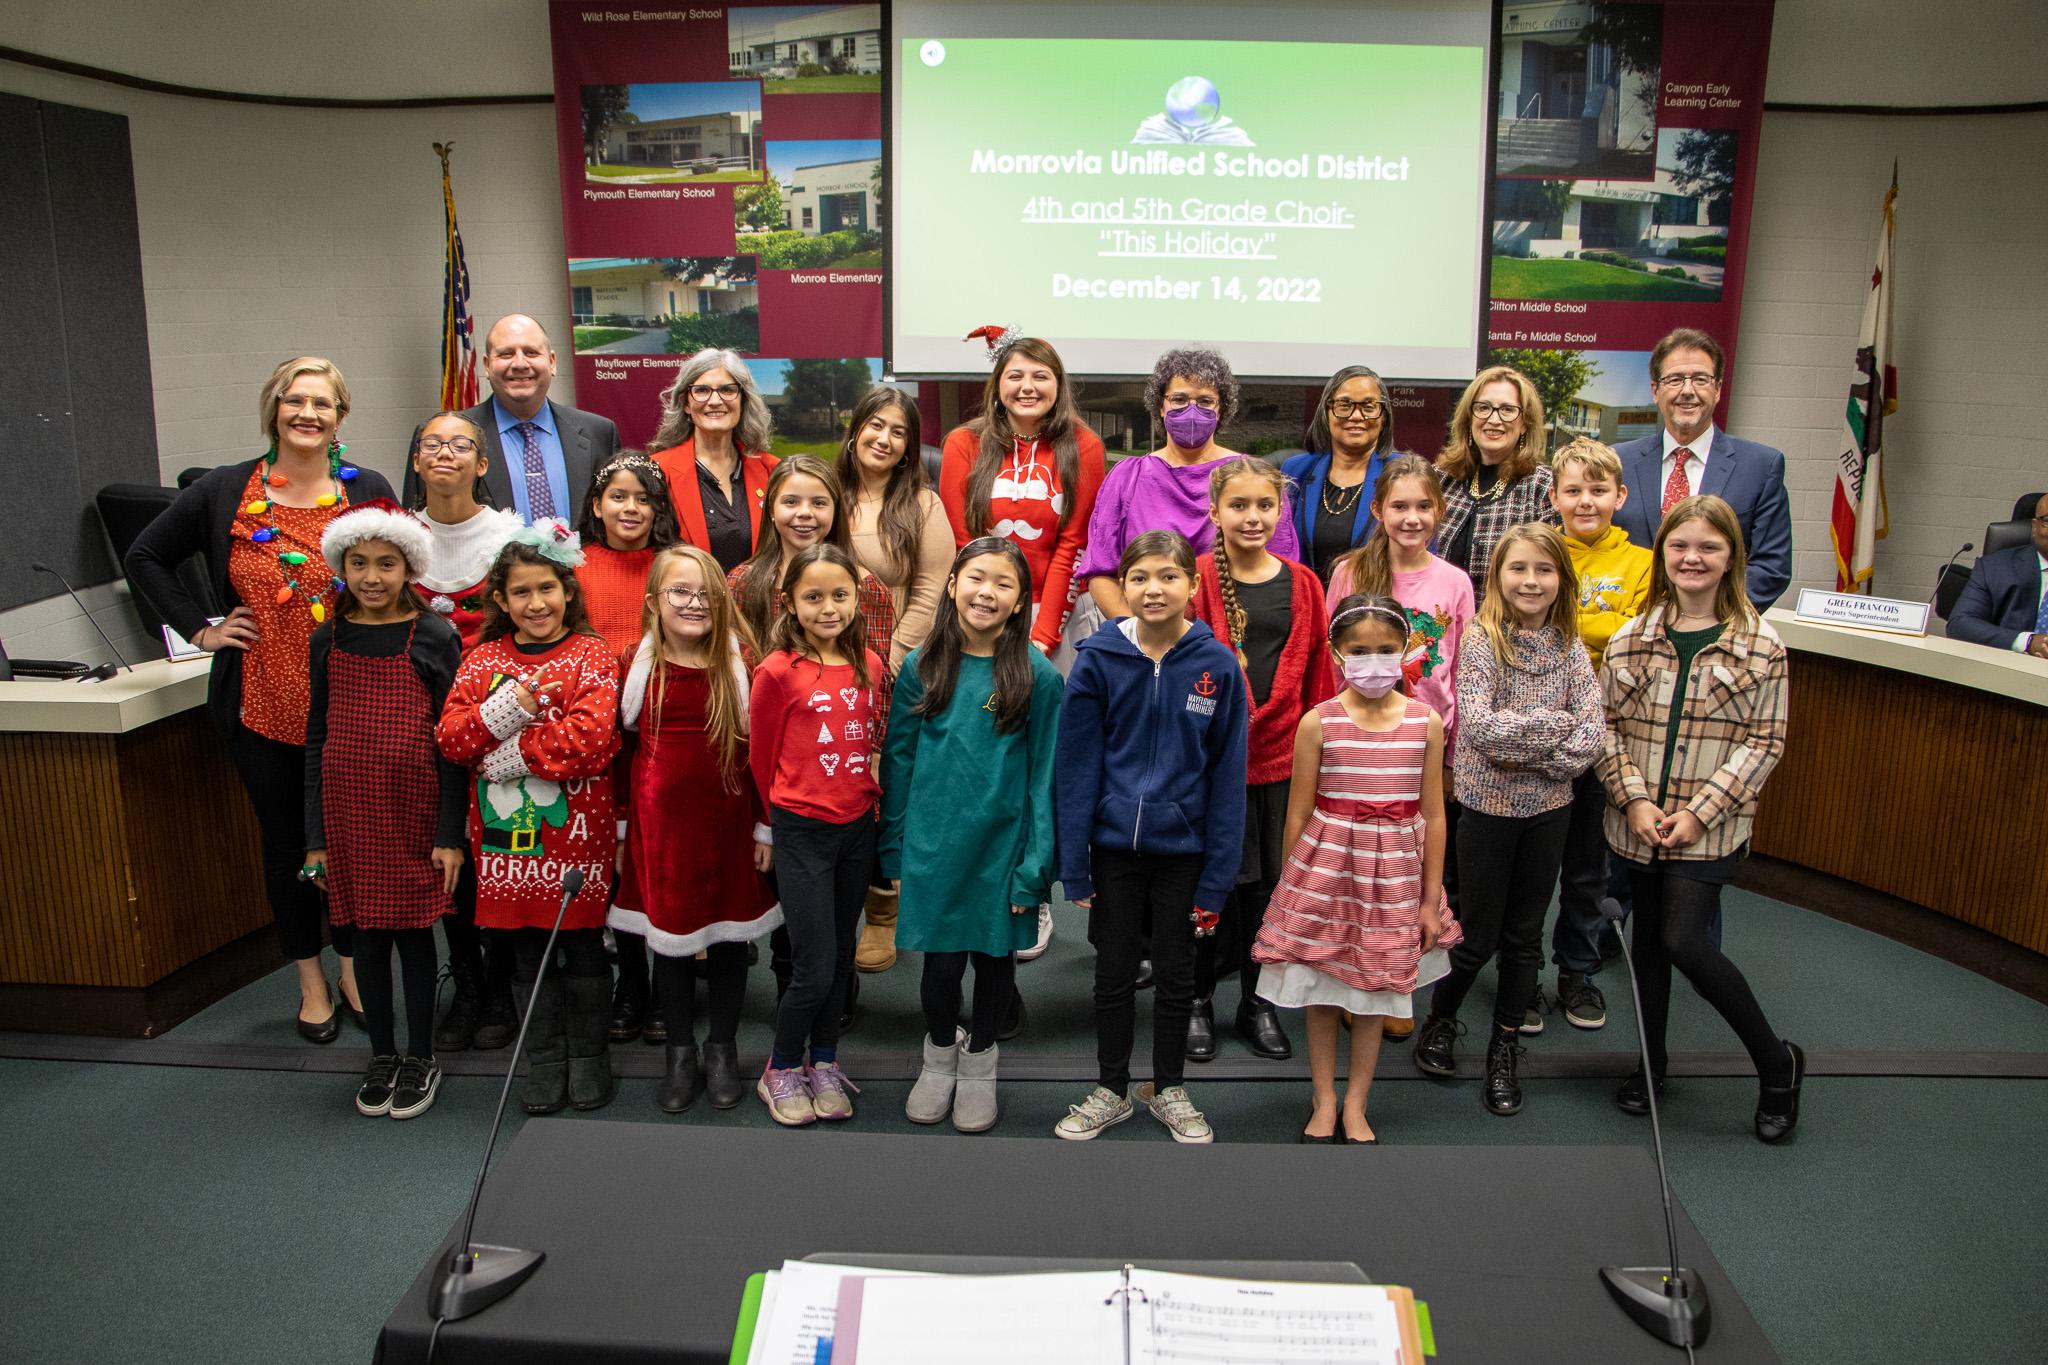 Members of the 4th/5th Grade Choir and MHS Performer Isabella Hurtado spread some Holiday cheer by singing some classic songs like Jingle Bells & Rockin’ Around the Christmas Tree.